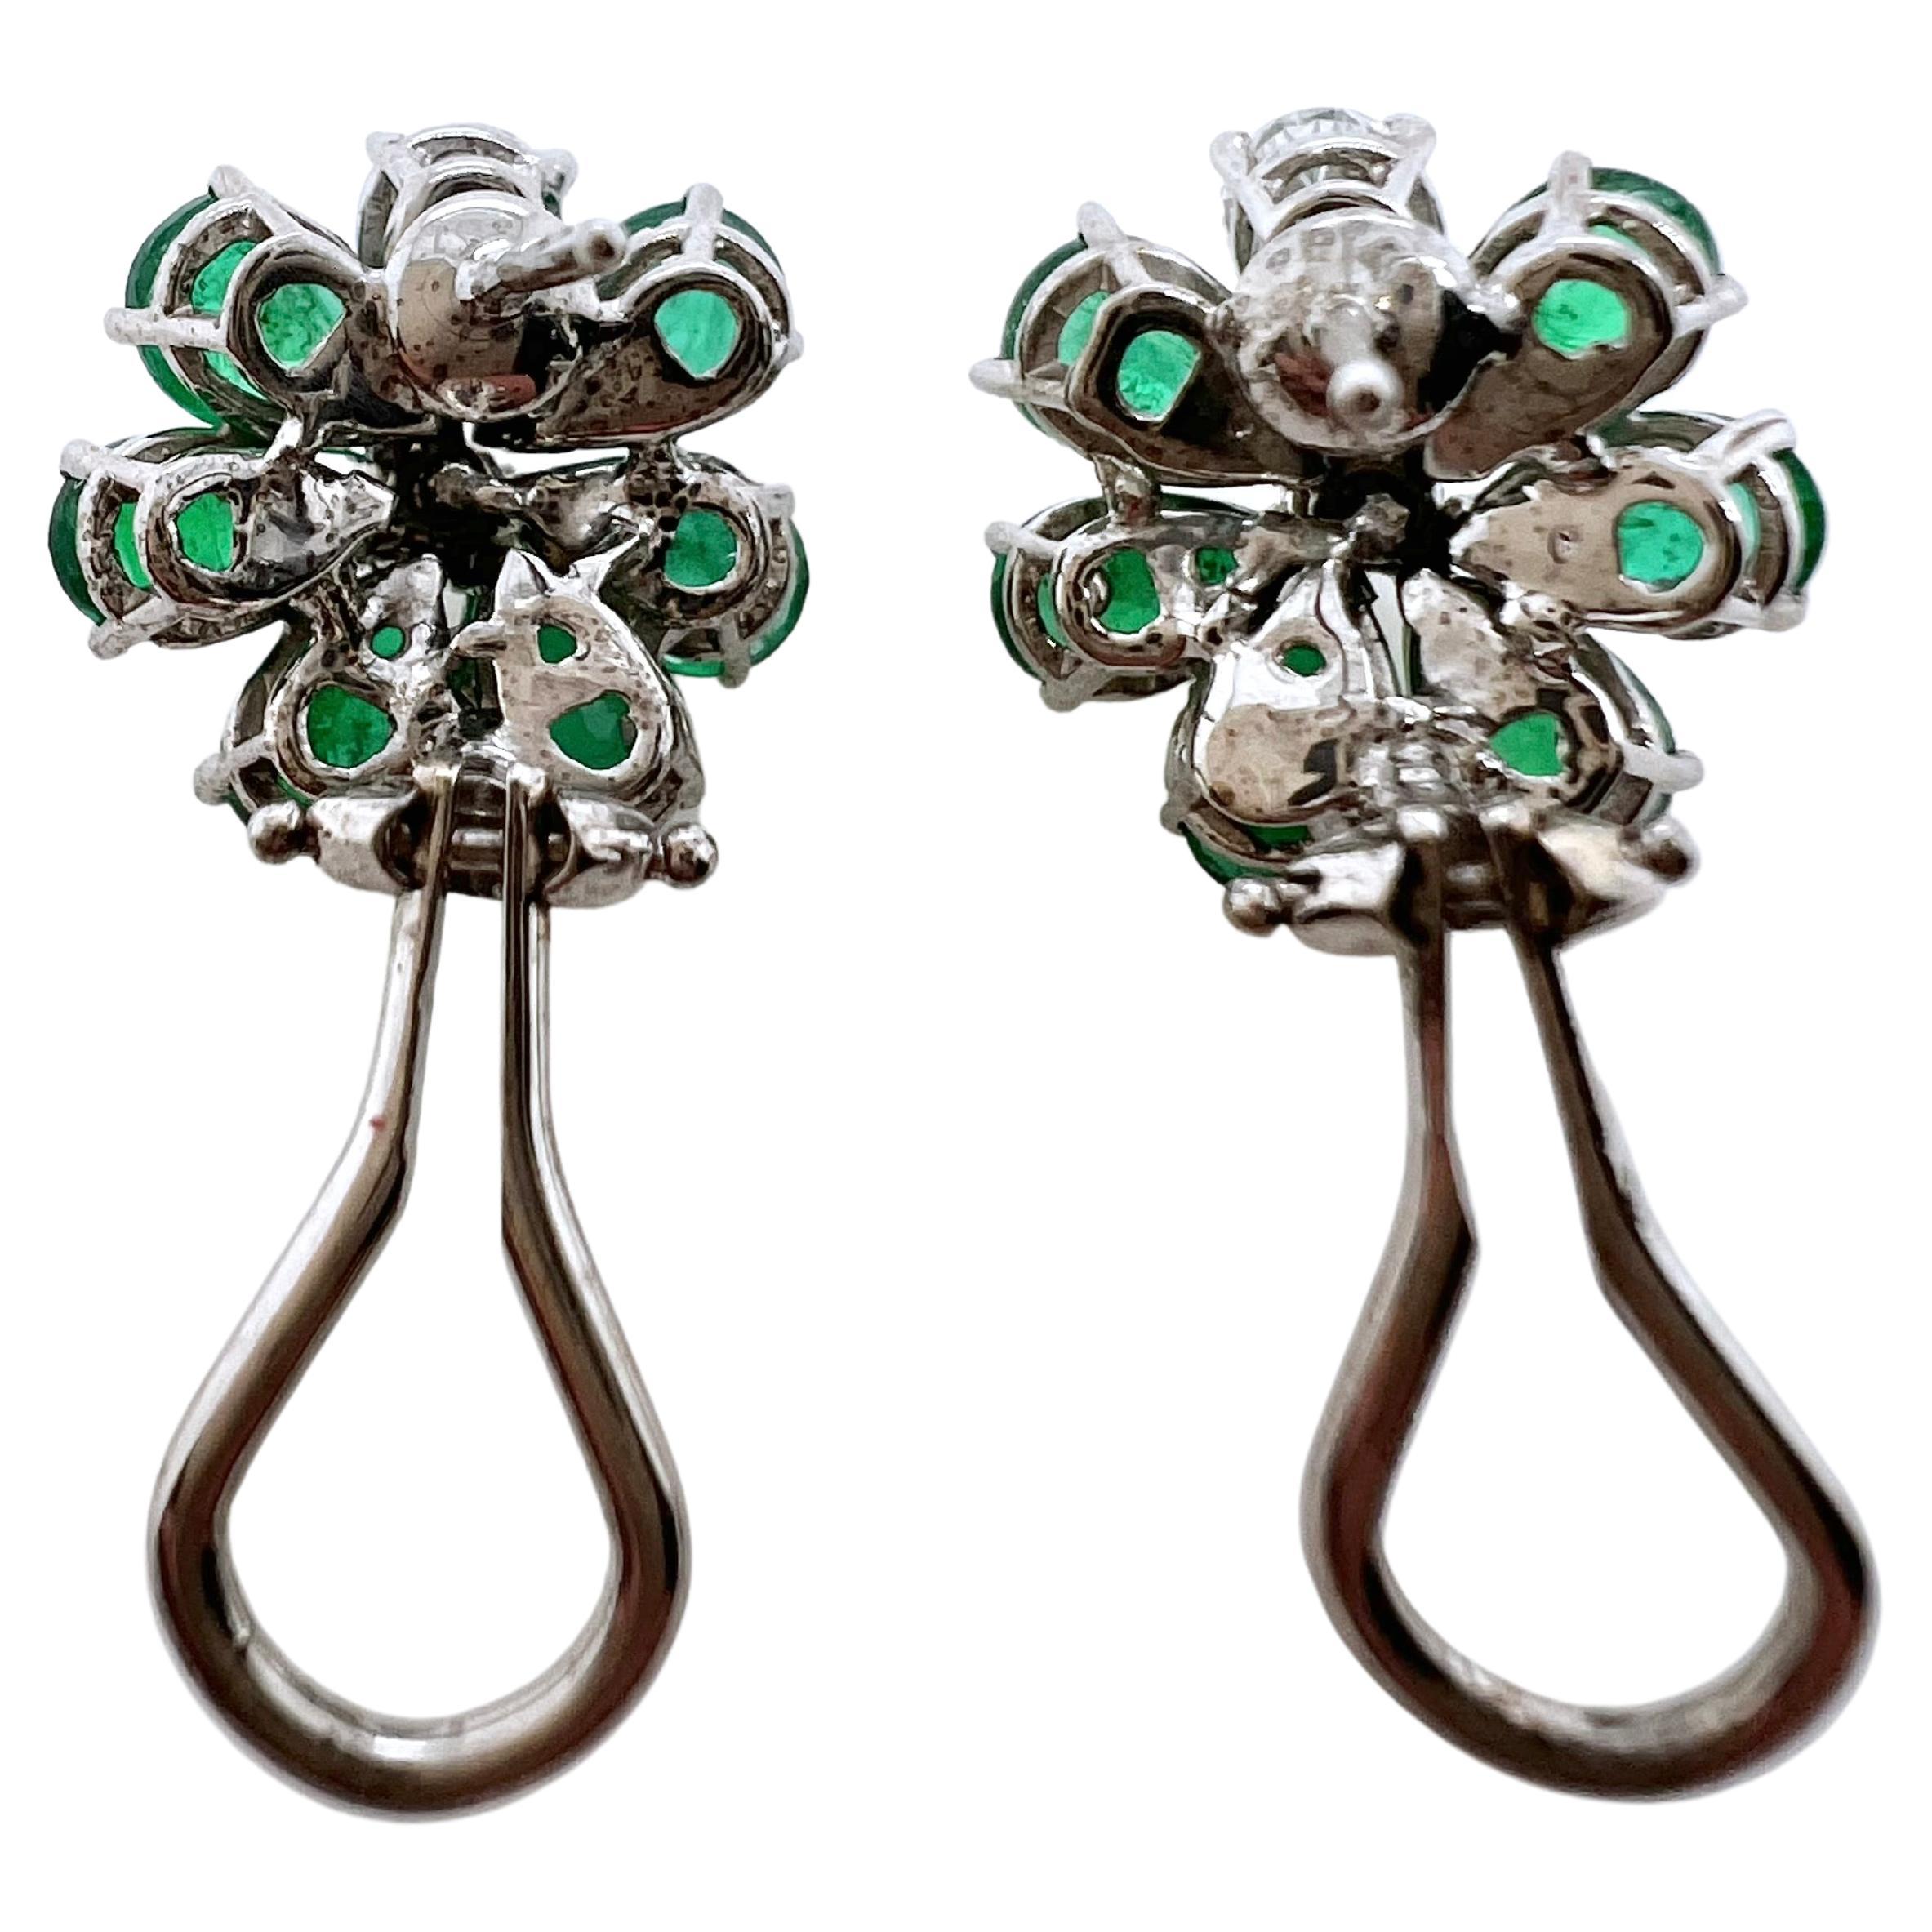 This unusual pair of emerald and diamond earrings are breathtaking!  The pear shaped emeralds are arrange
surrounding the round brilliant and pear shaped diamond to give a dramatic look.  The lush, vibrant green in the
emeralds contrast the white,